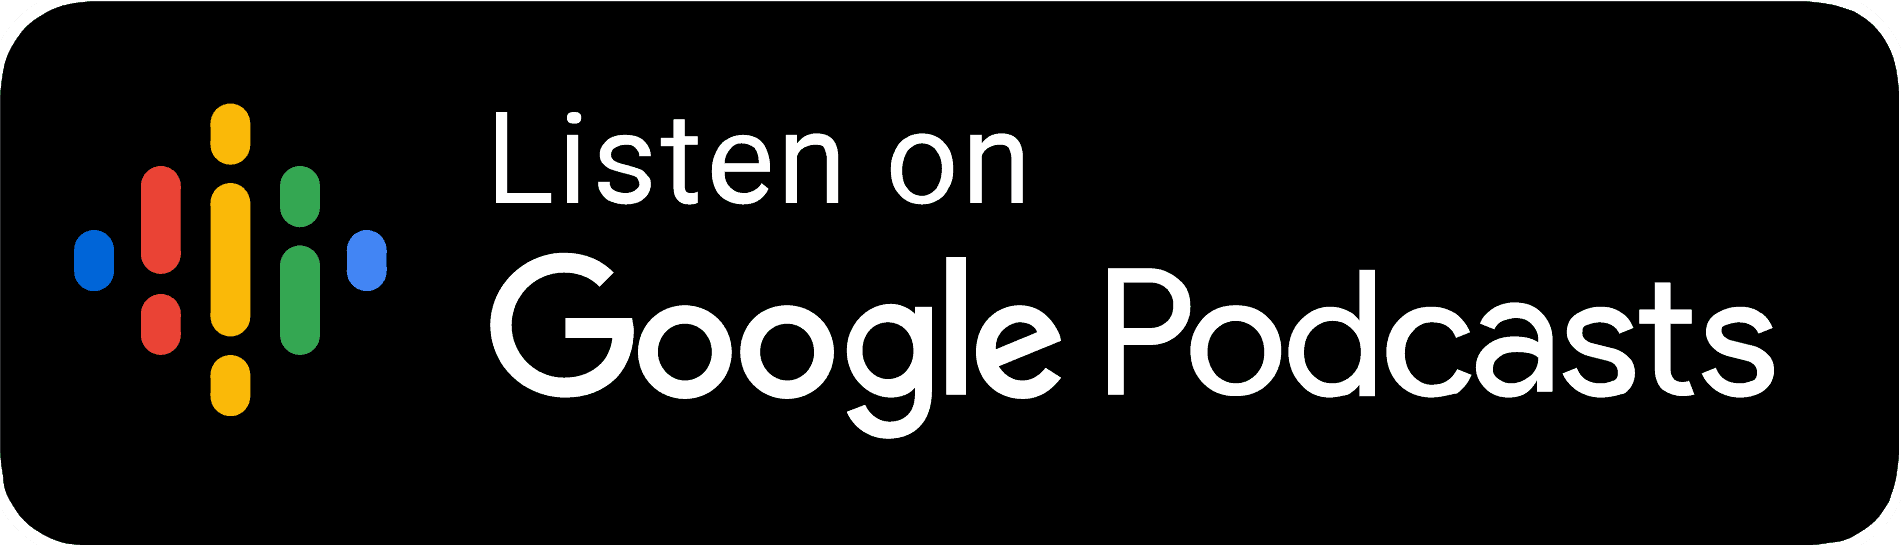 Luister op Google Podcasts